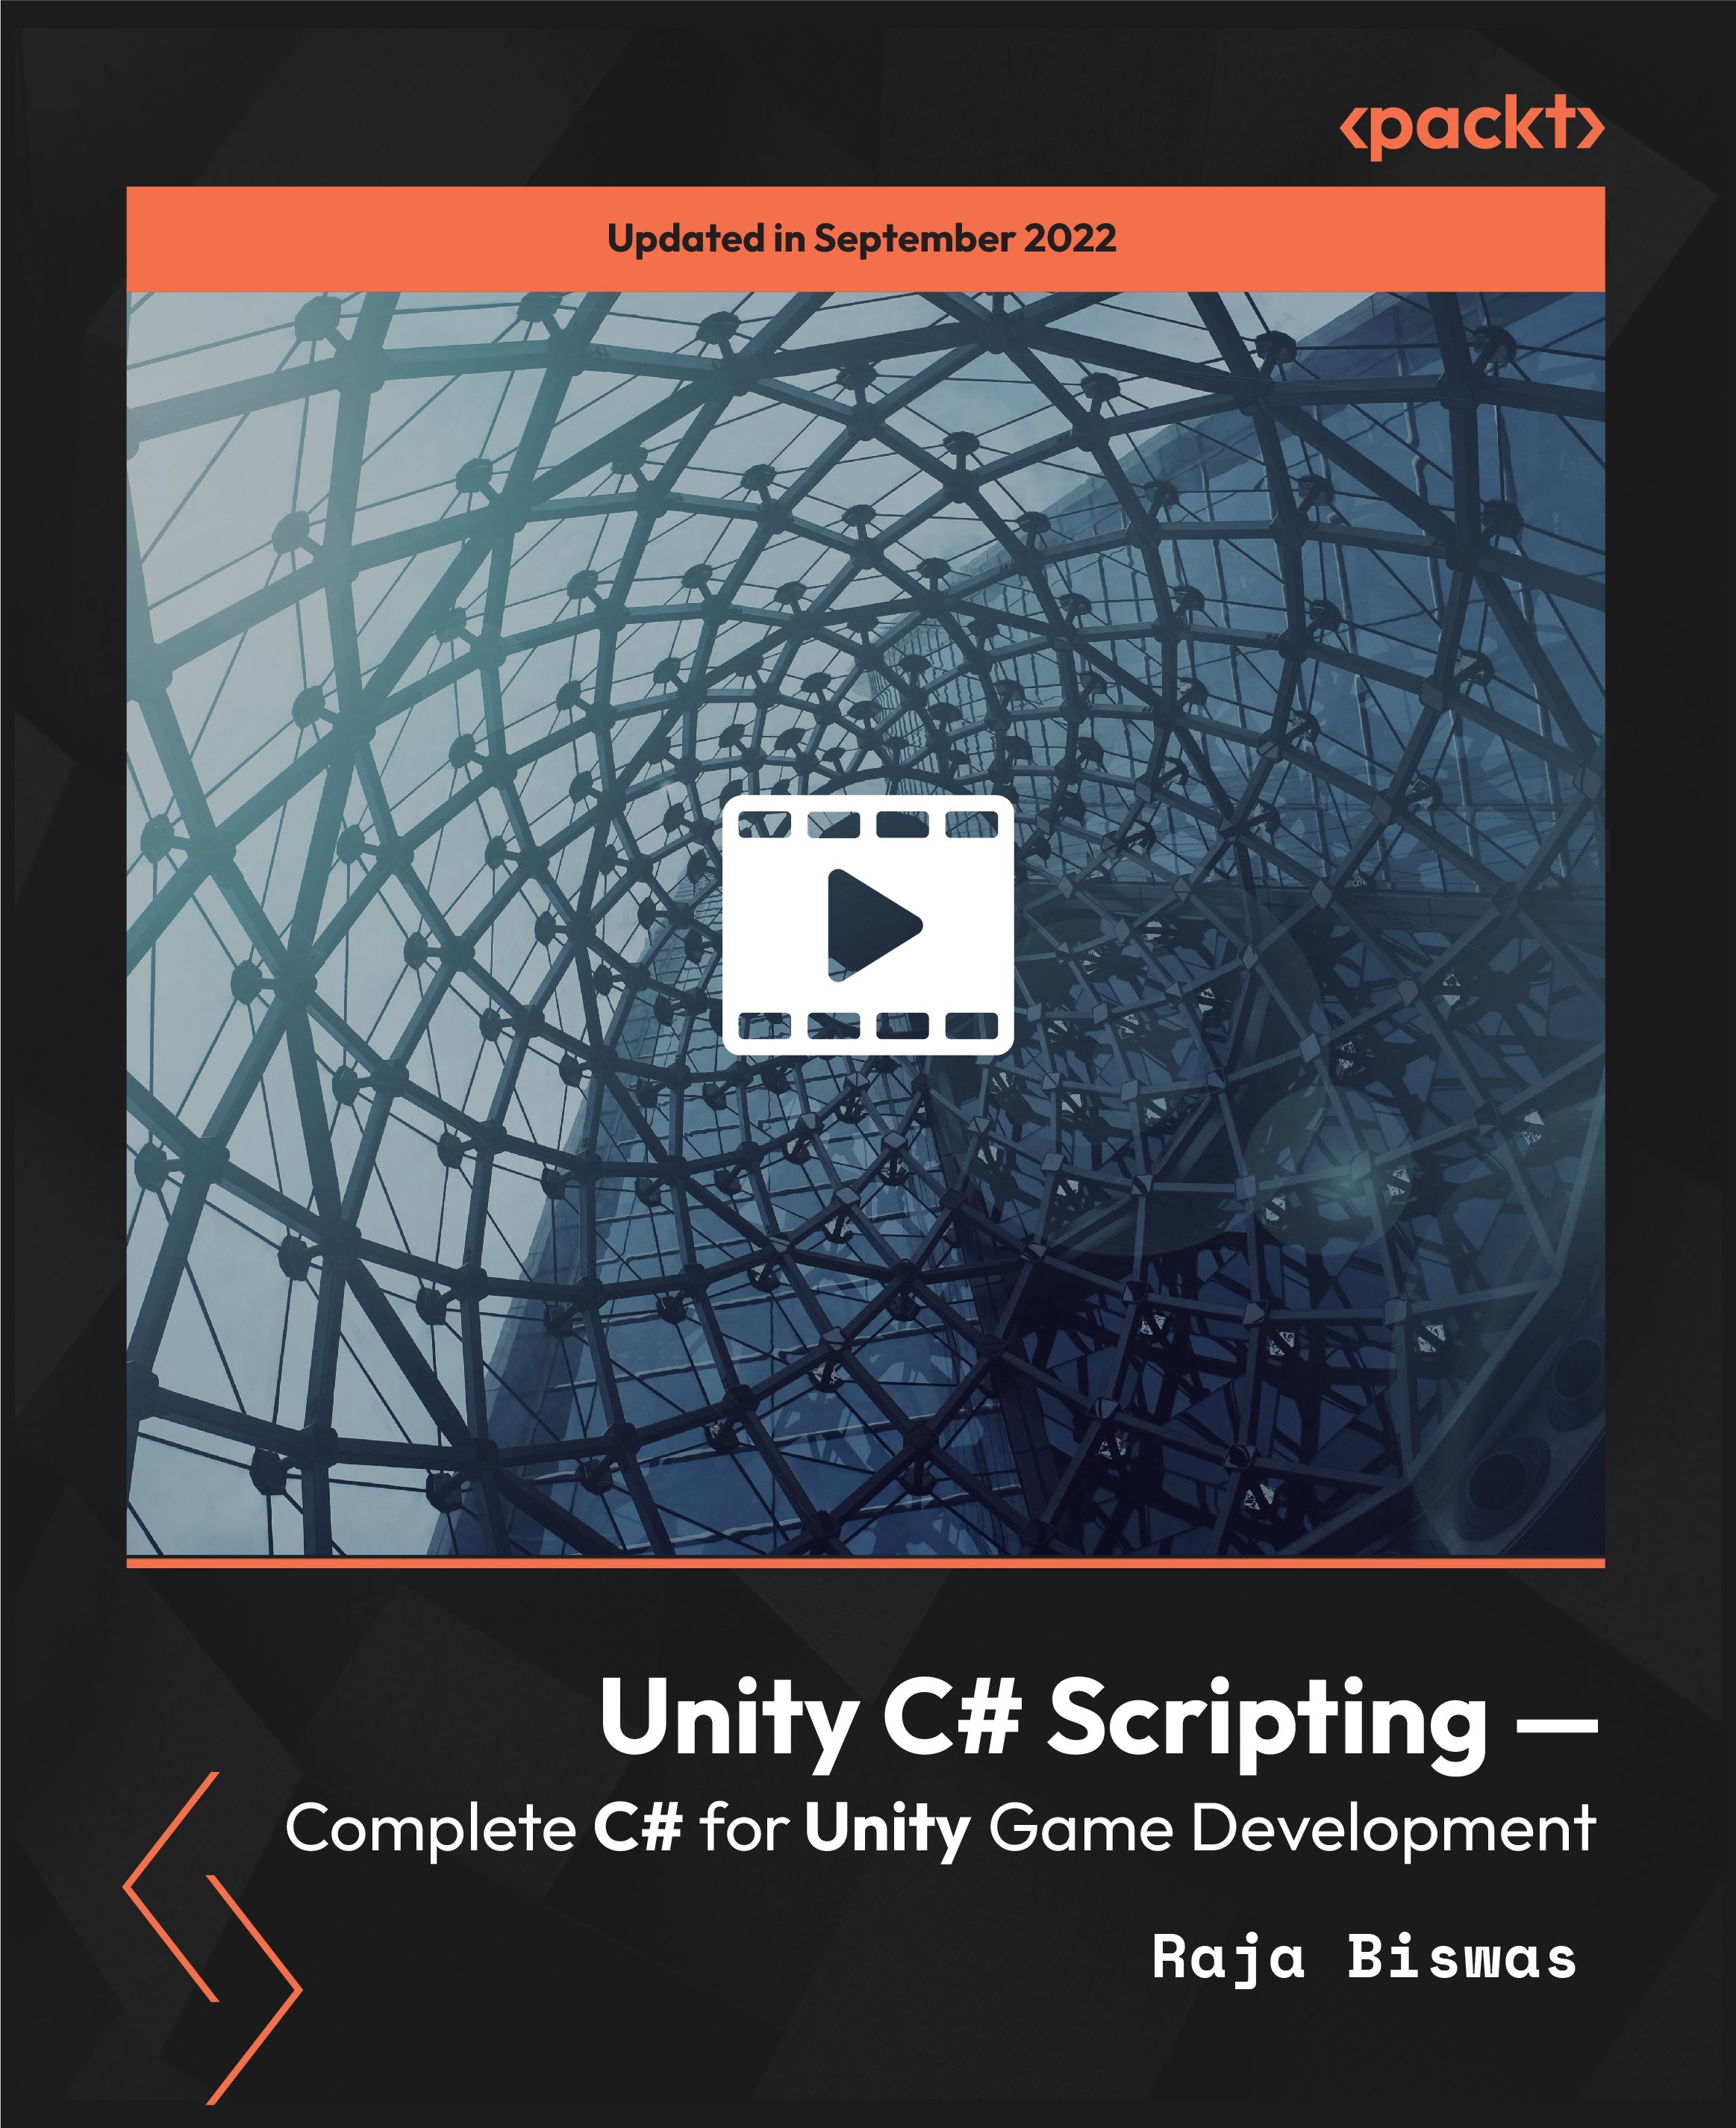 Unity C# Scripting - Complete C# for Unity Game Development